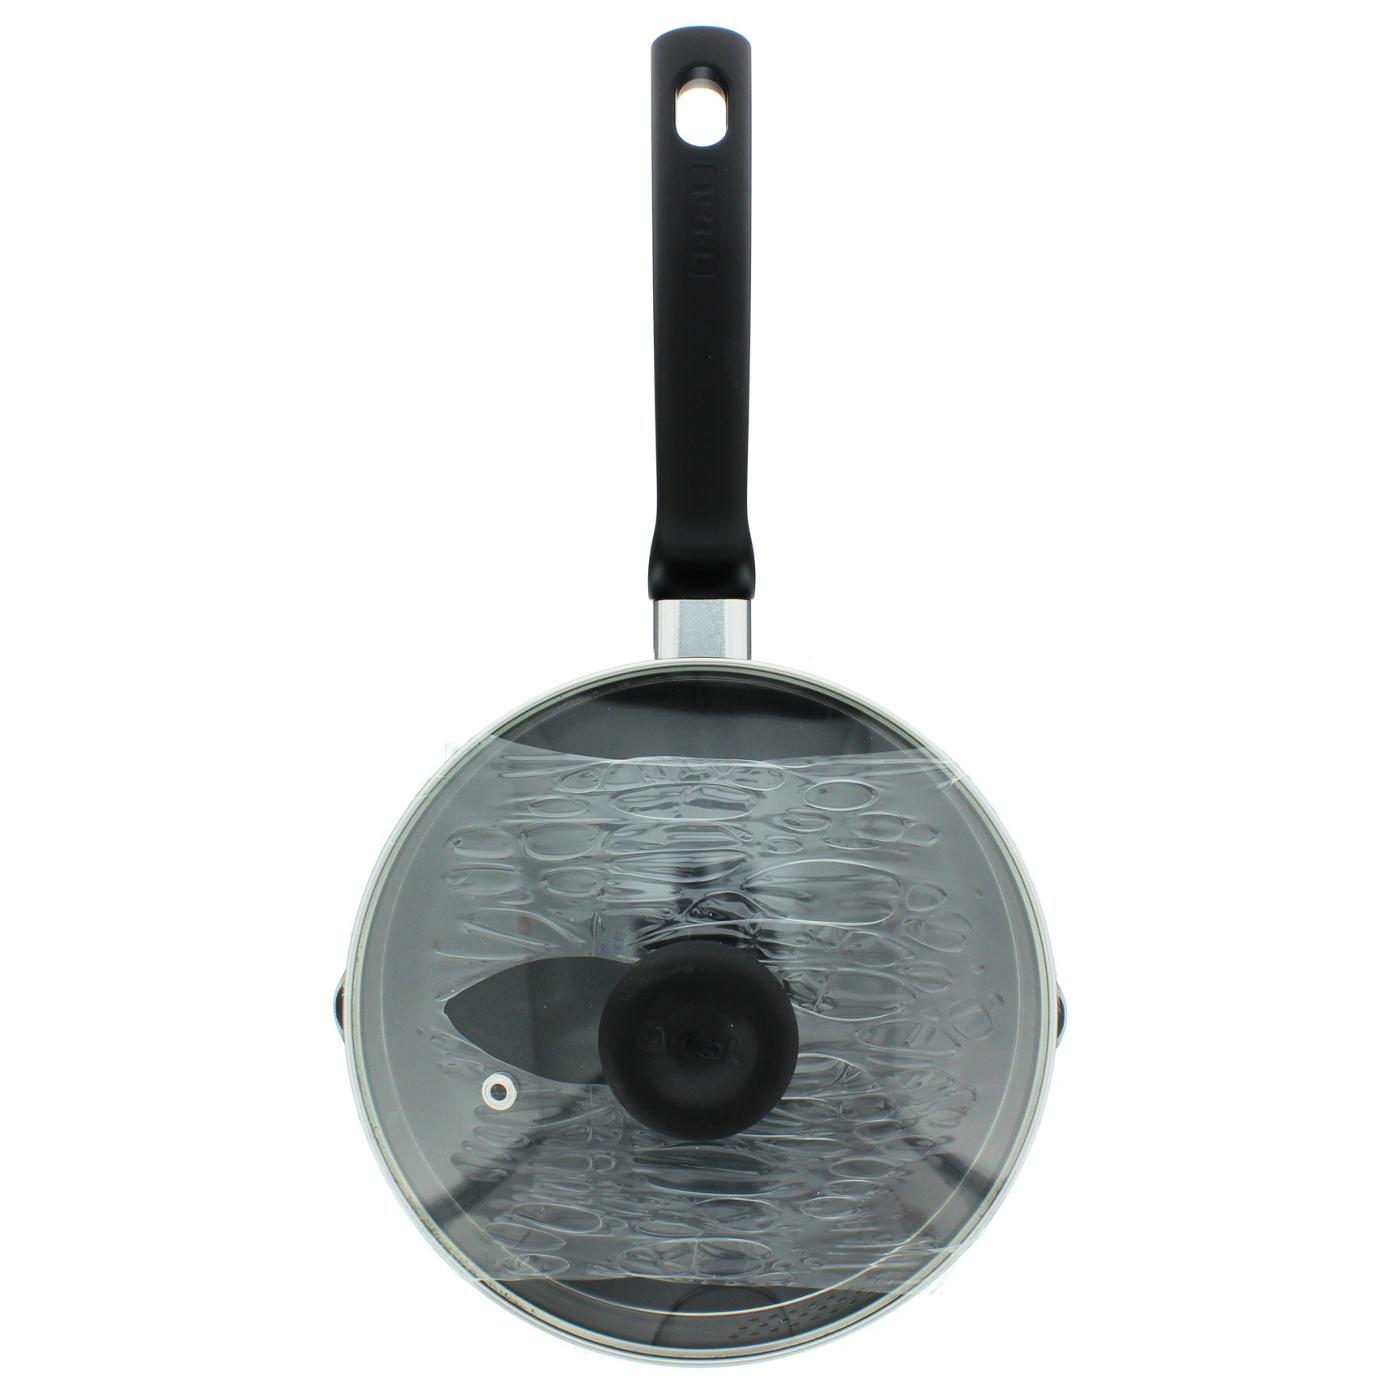 T-fal Soft Handle Black Sauce Pan with Lid; image 2 of 2